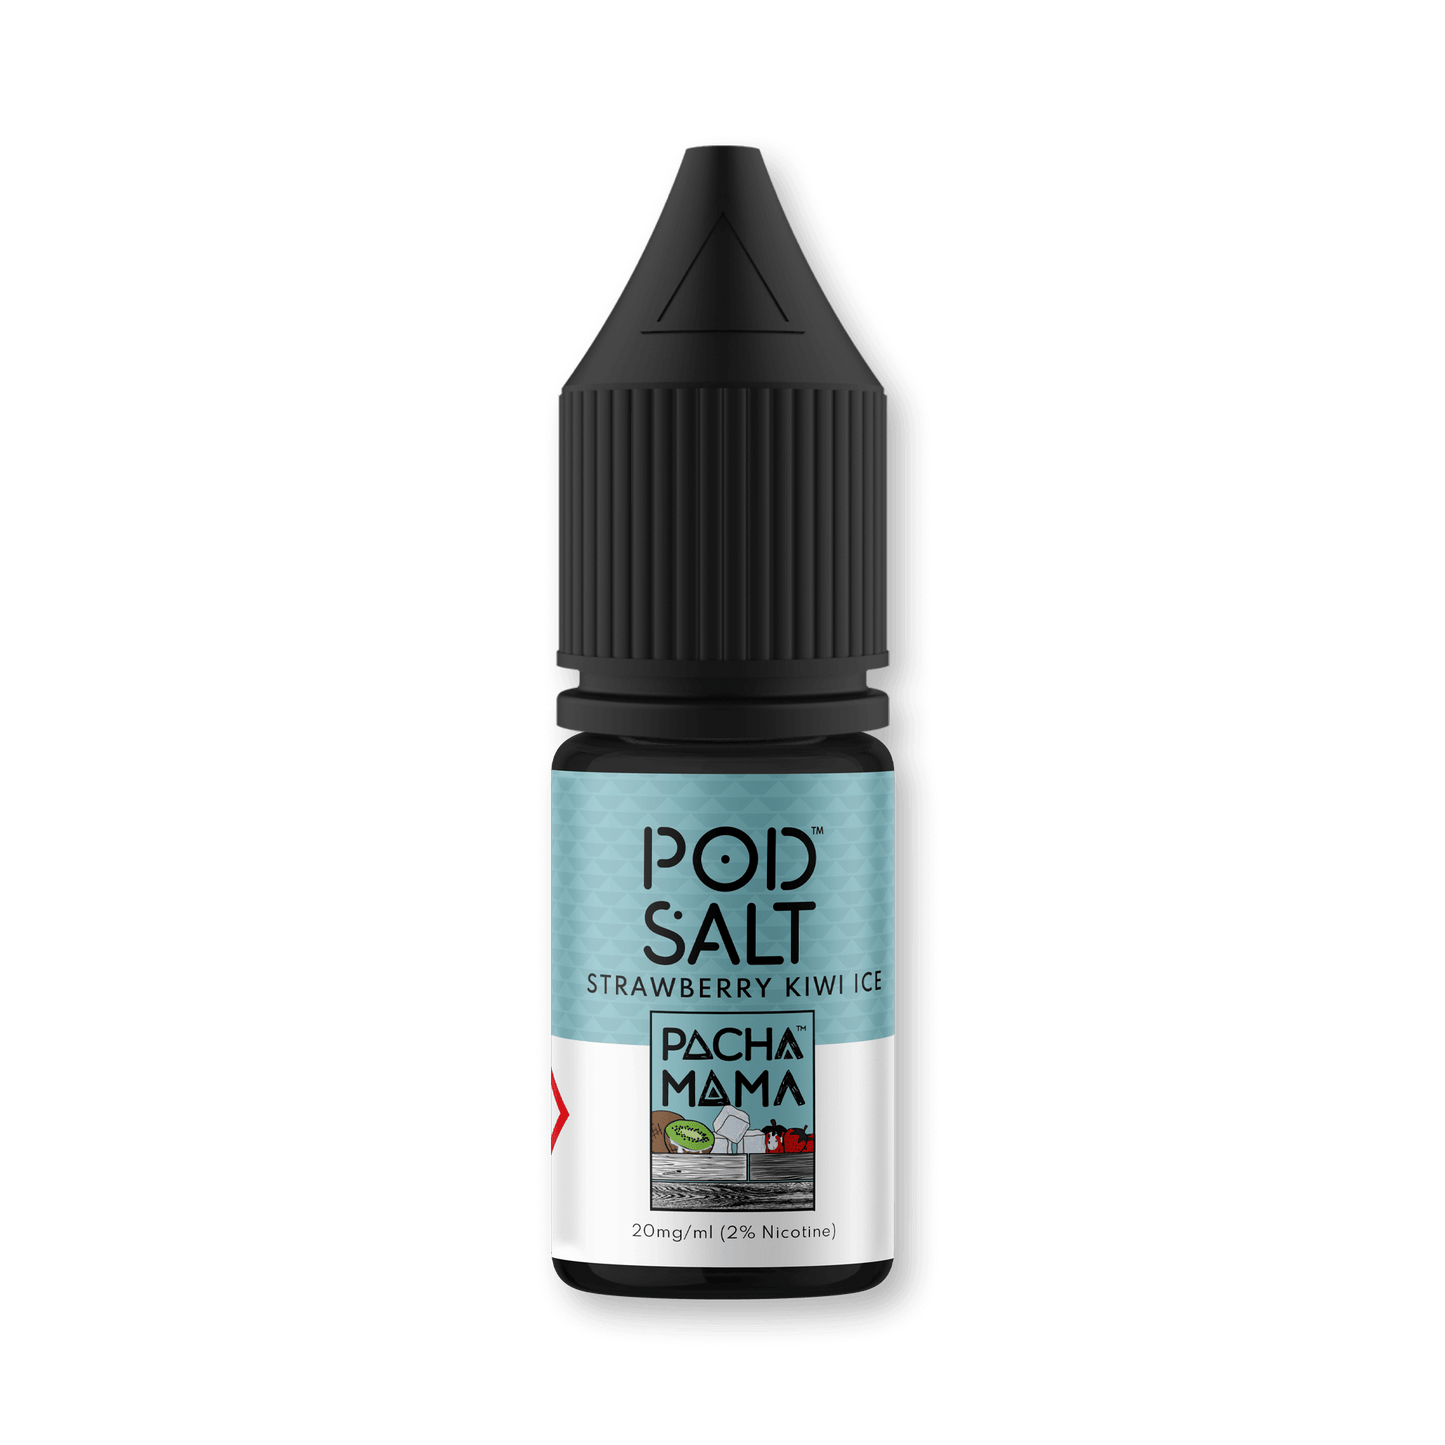 ripe strawberries, tropical kiwi, smooth icy exhale, Pacha Mama E-liquid, Incan Goddess, Mother Nature, original blend, refreshing vape, sweet fragrance, spring essence, all-day vaping delight, Pod Salt Fusions, E-liquid collaboration, leading brands, signature flavors, award-winning Nicotine Salt, delightful taste, Hit the Spot, 30ml bottle size, 50VG/50PG ratio, Made in the UK, TPD Compliant.